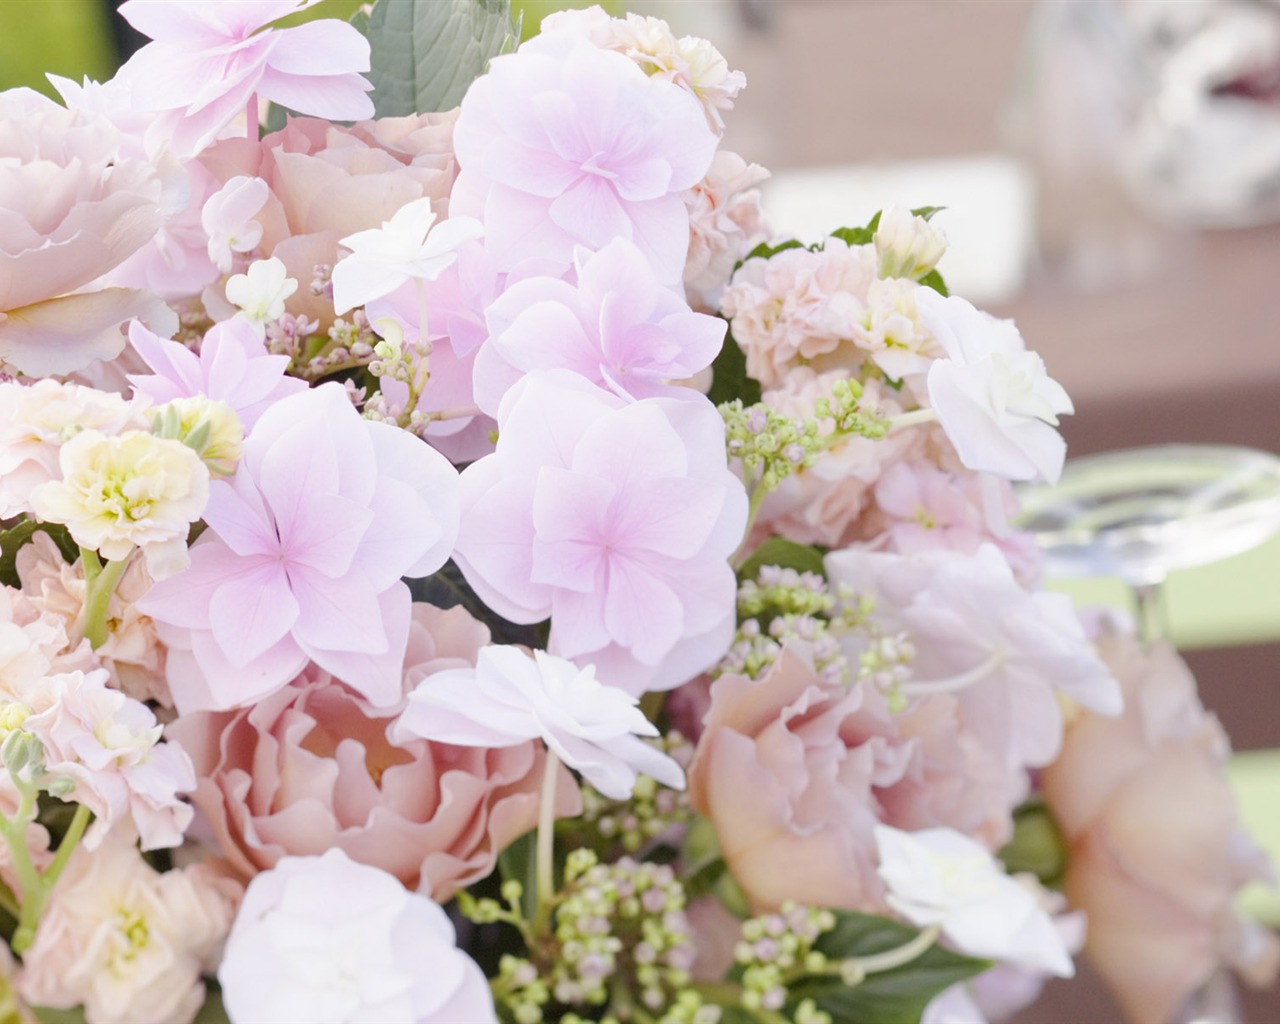 Weddings and Flowers wallpaper (2) #4 - 1280x1024